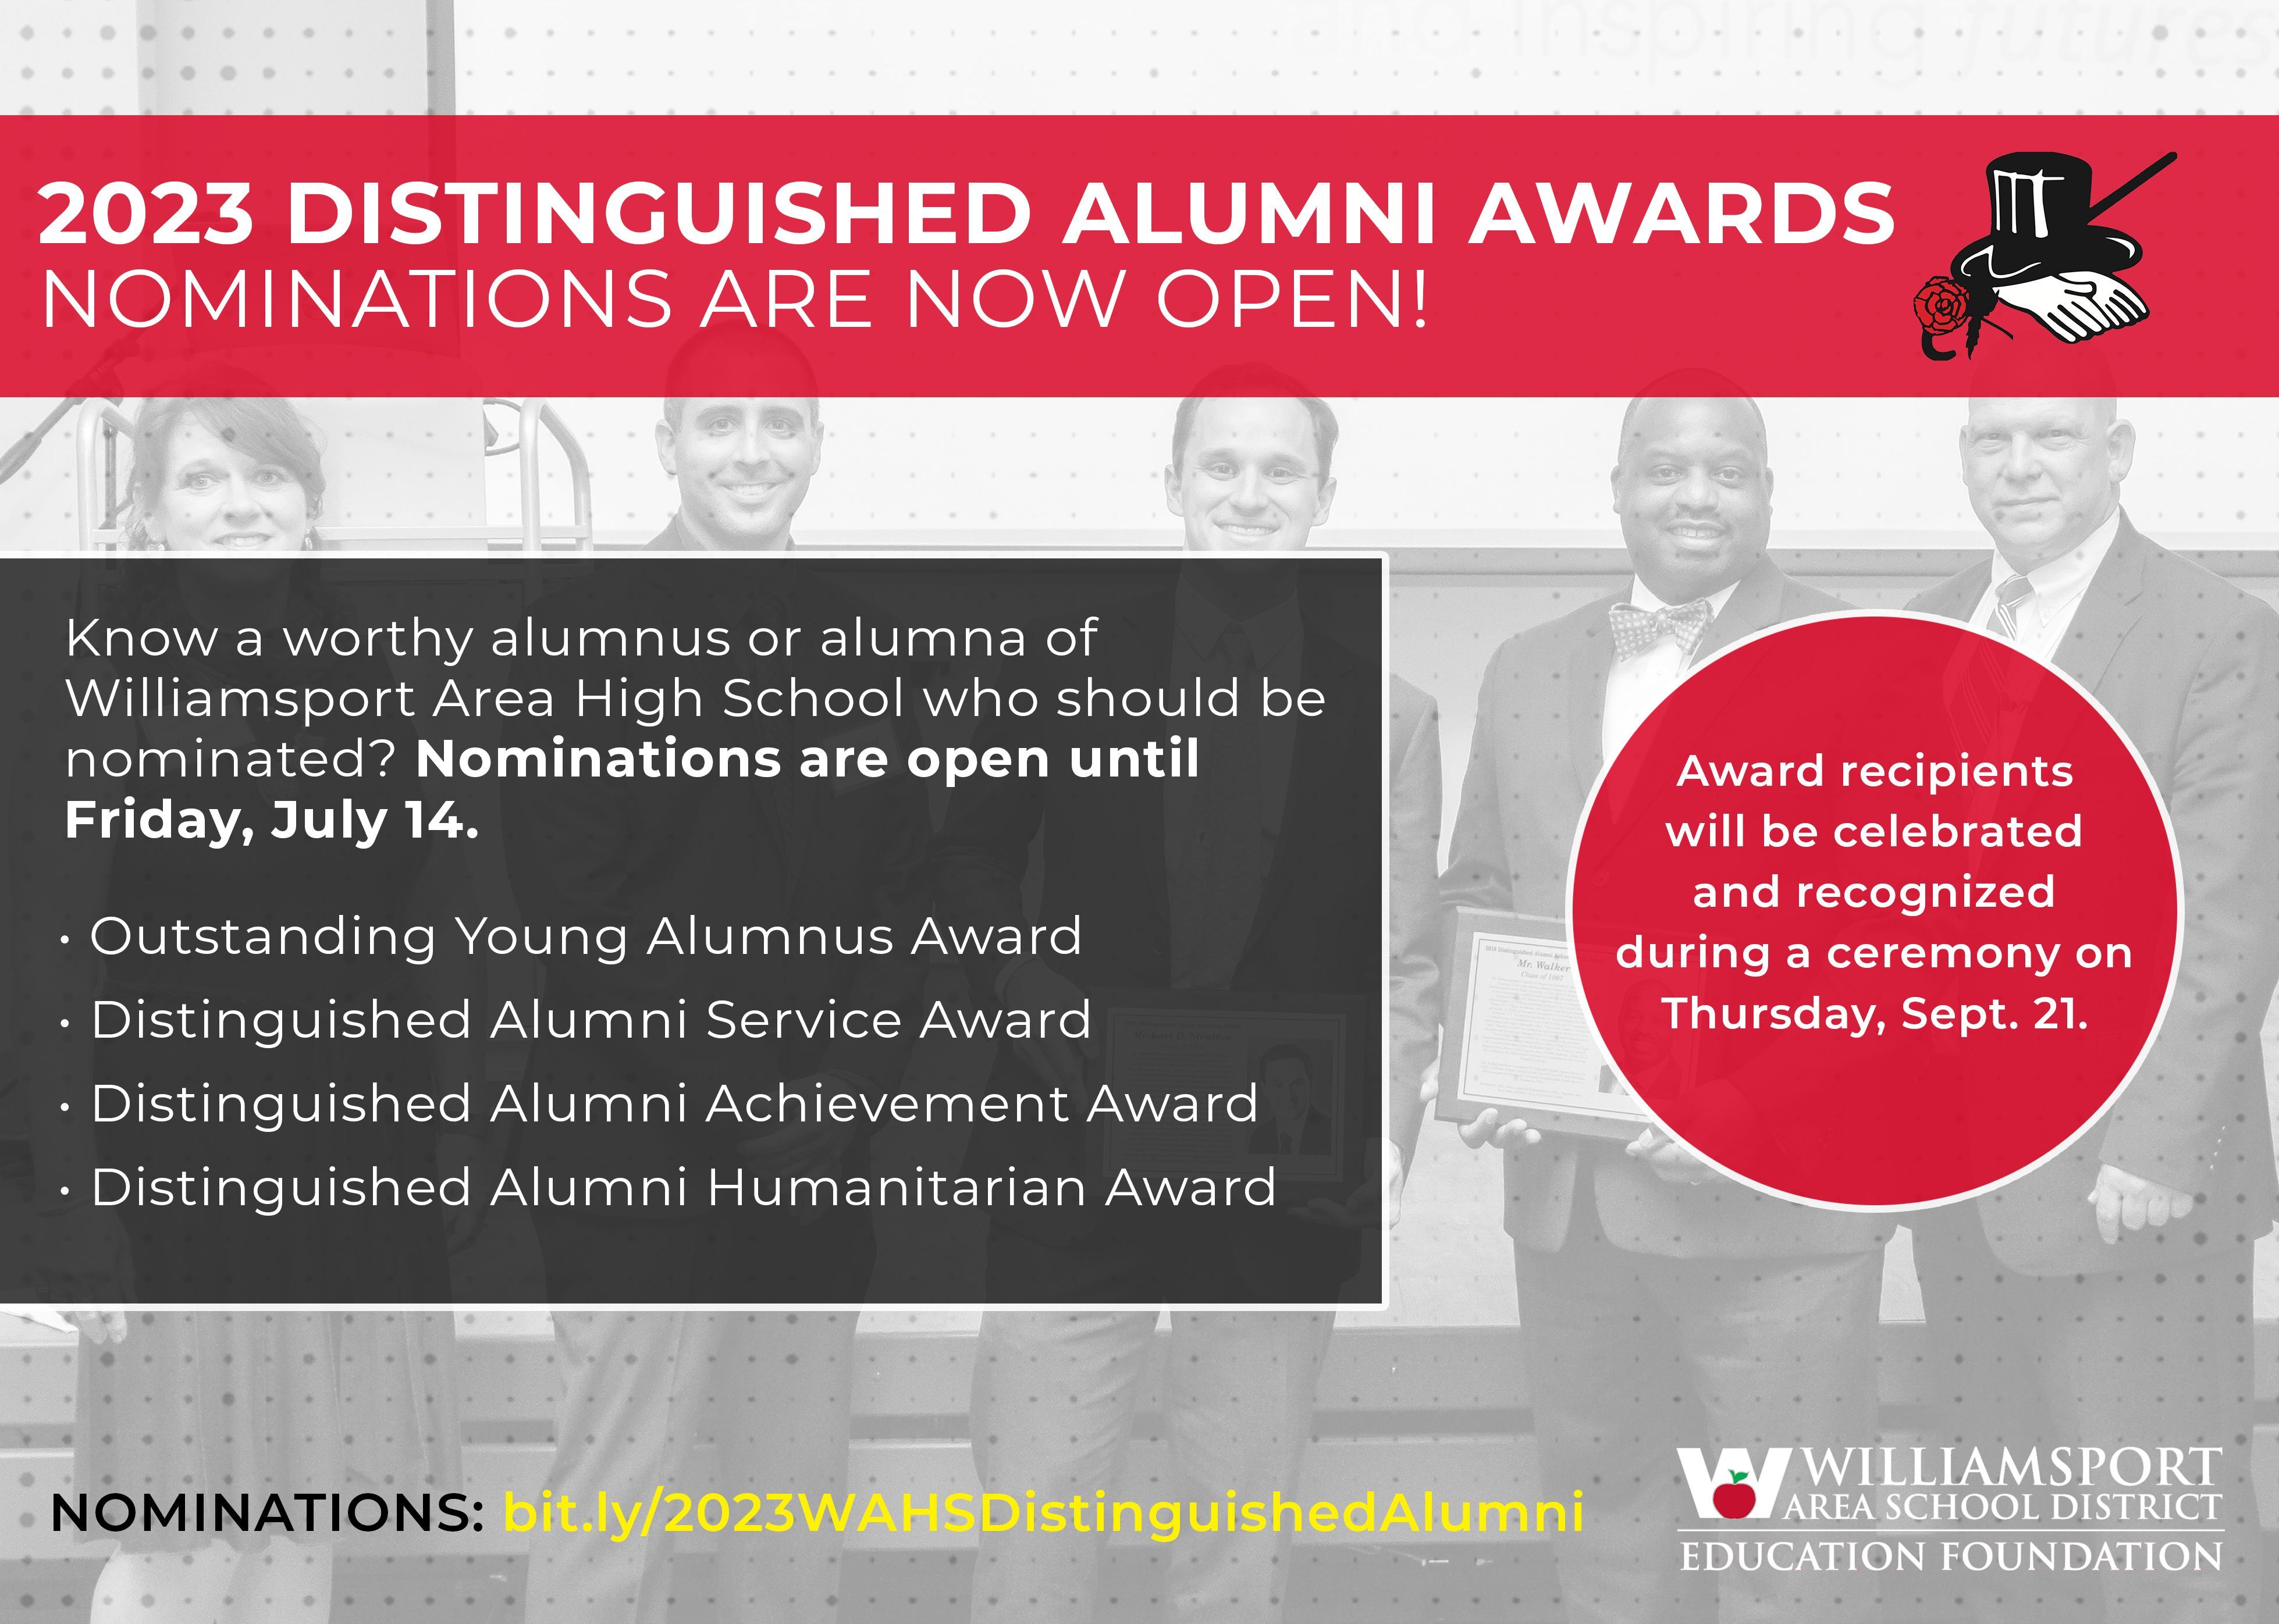 Nominations Sought for WAHS 2023 Distinguished Alumni Awards